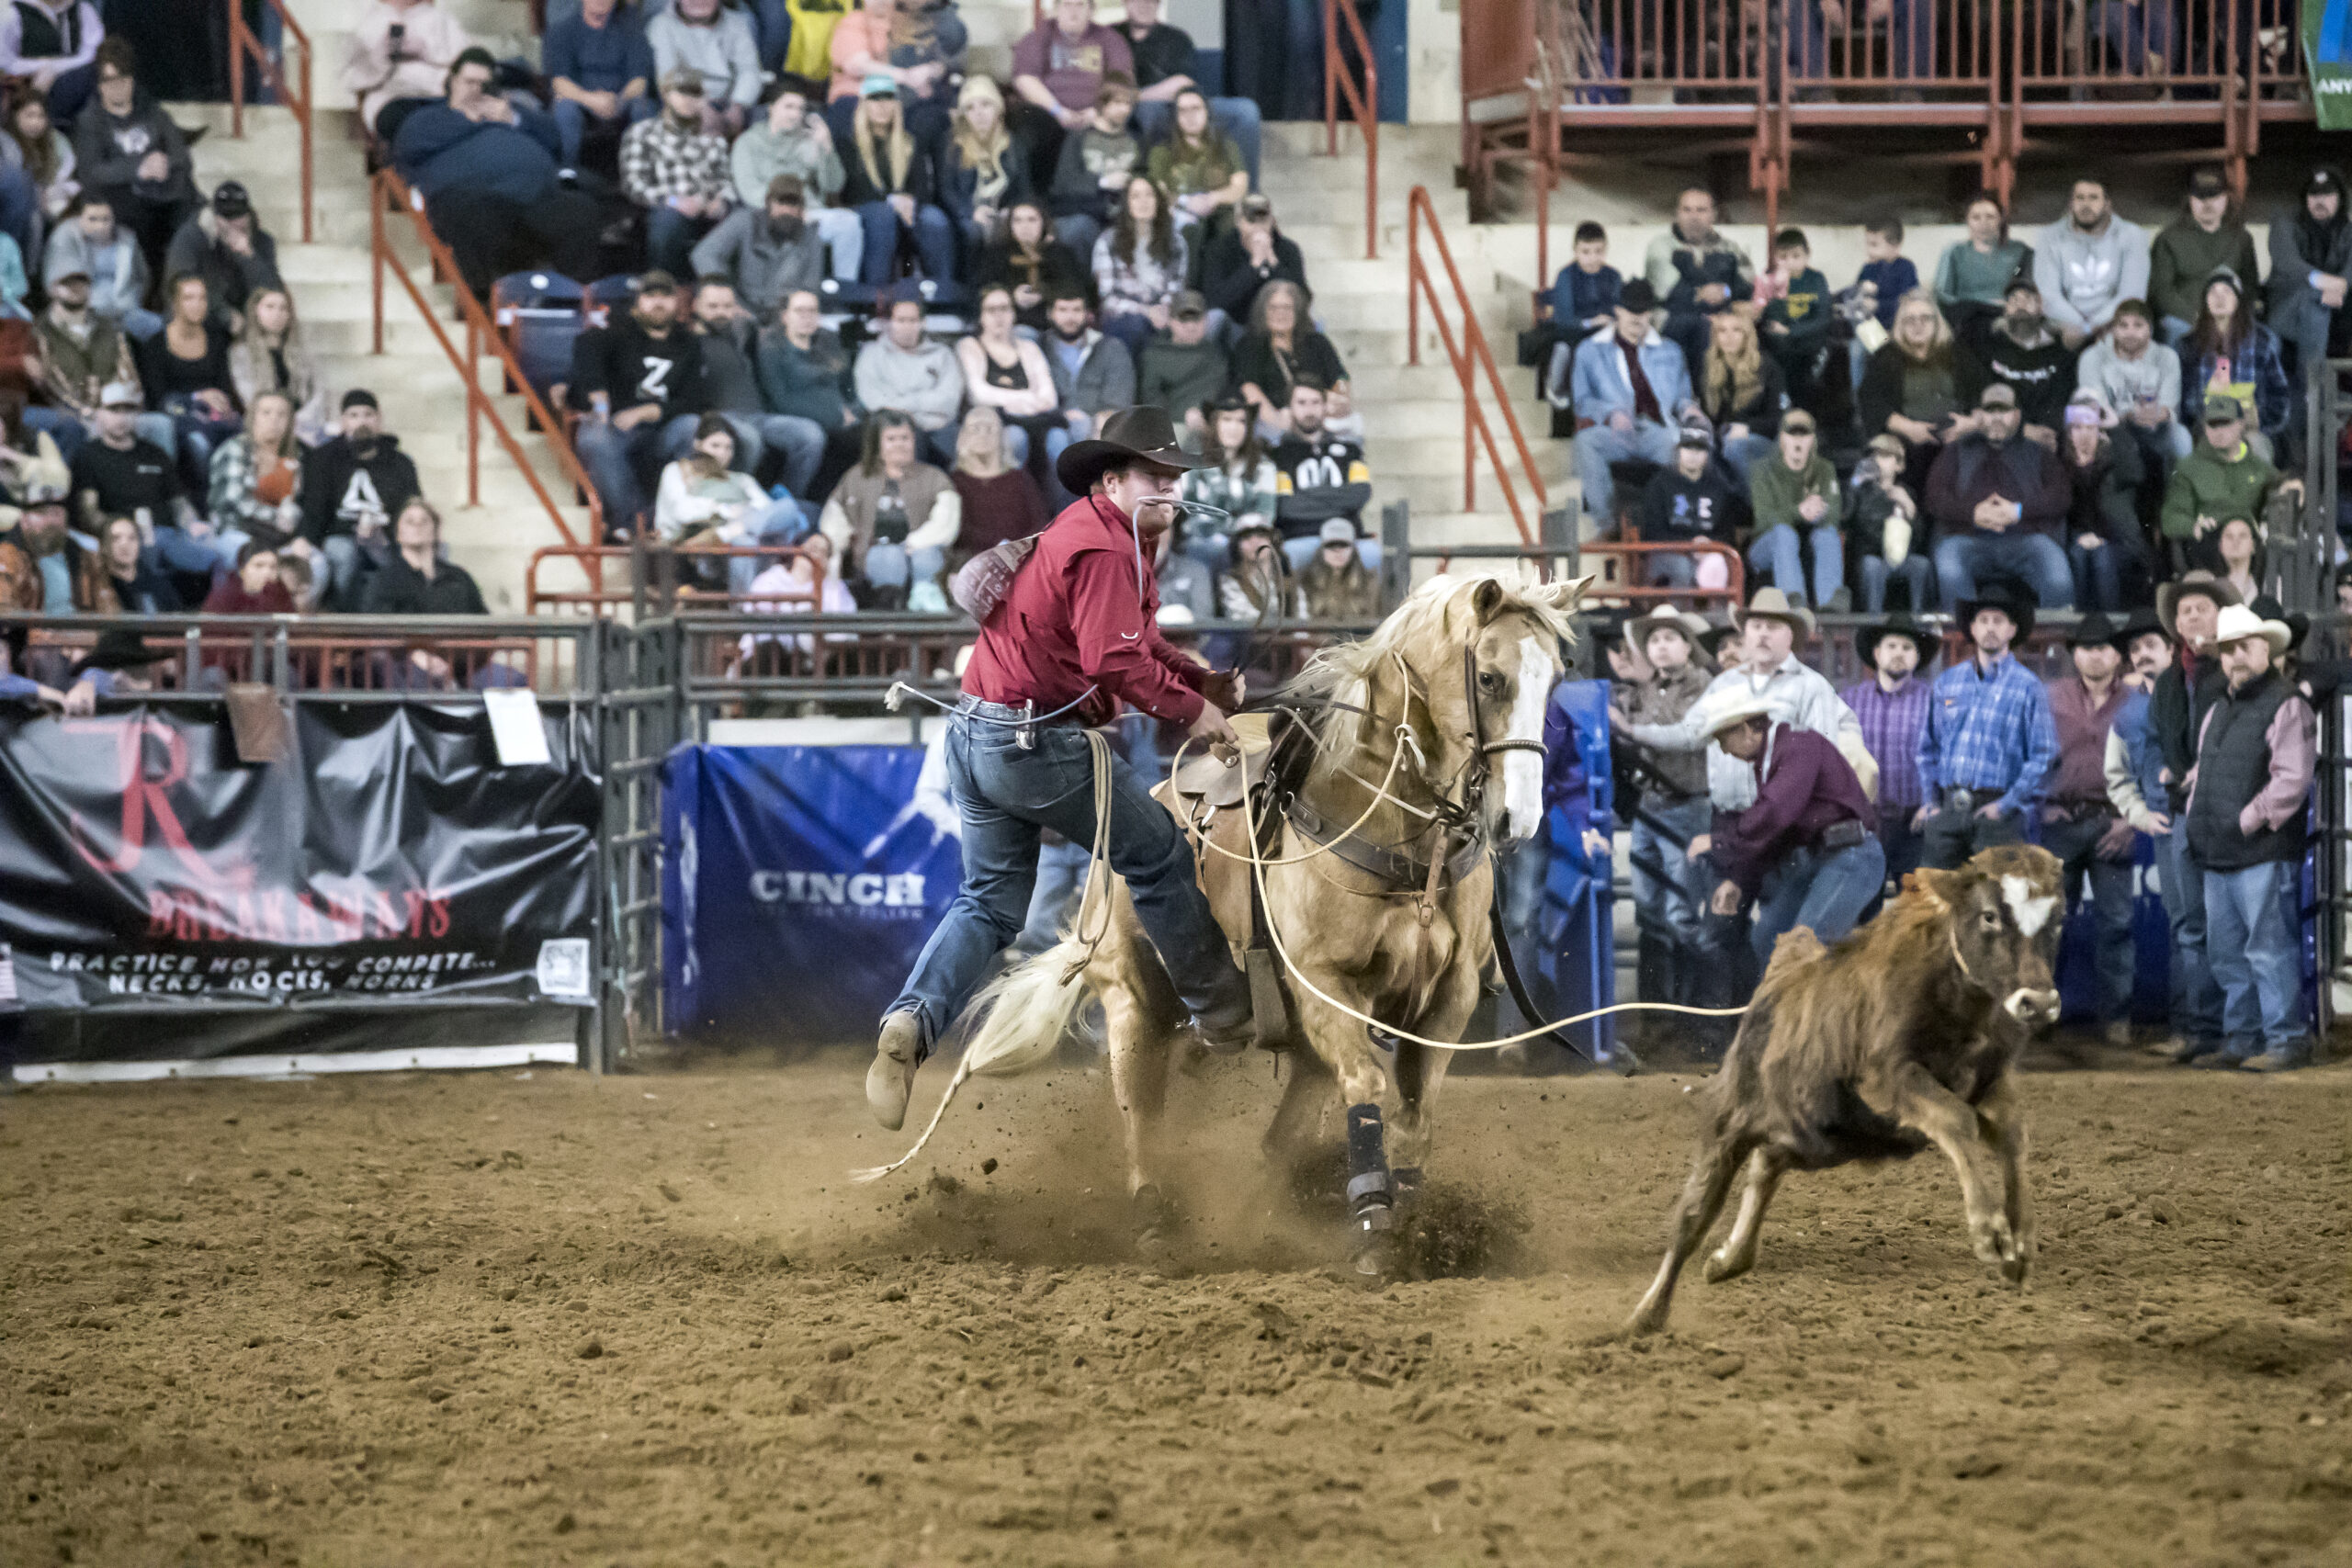 Zane Kilgus may have just purchased his PRCA card, but the First Frontier cowboy has a slew of titles to his name.